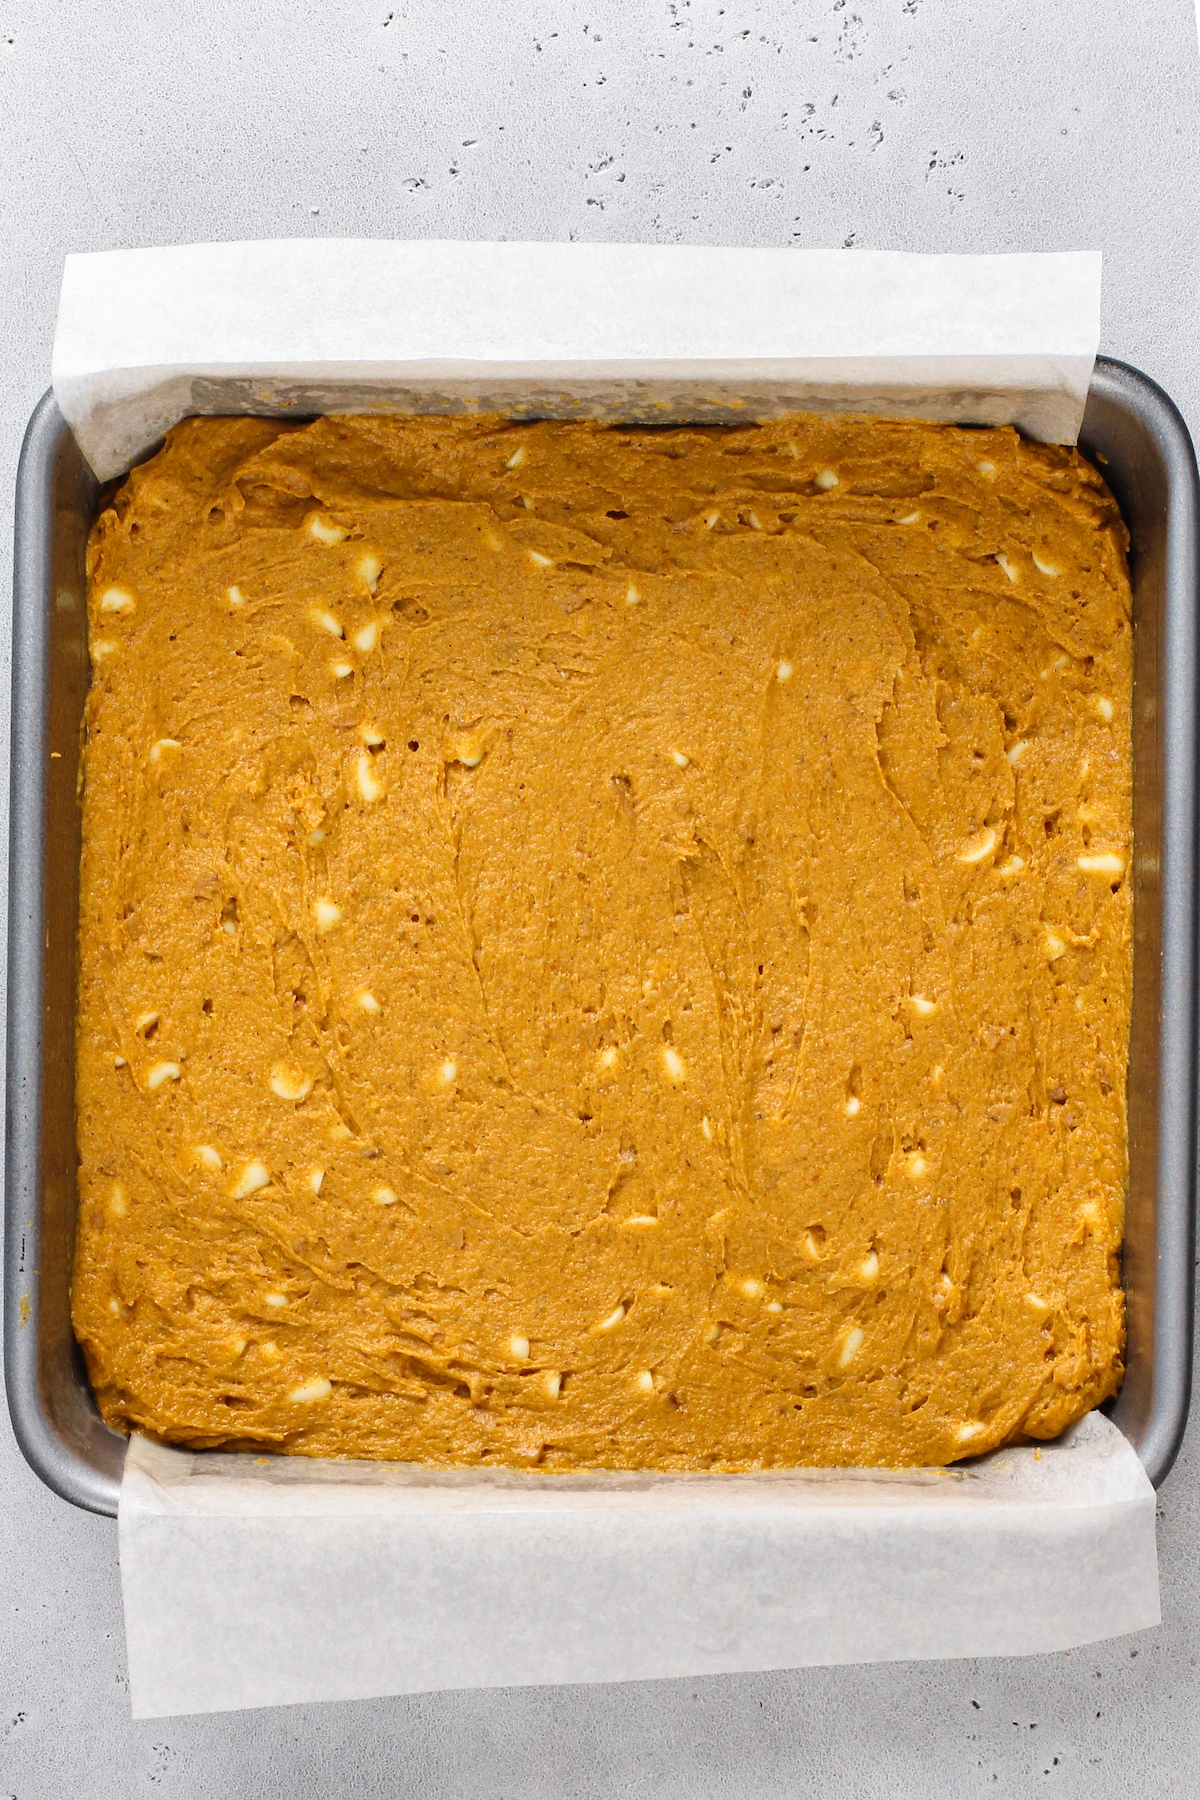 A square baking pan lined with parchment, and filled with pumpkin batter.